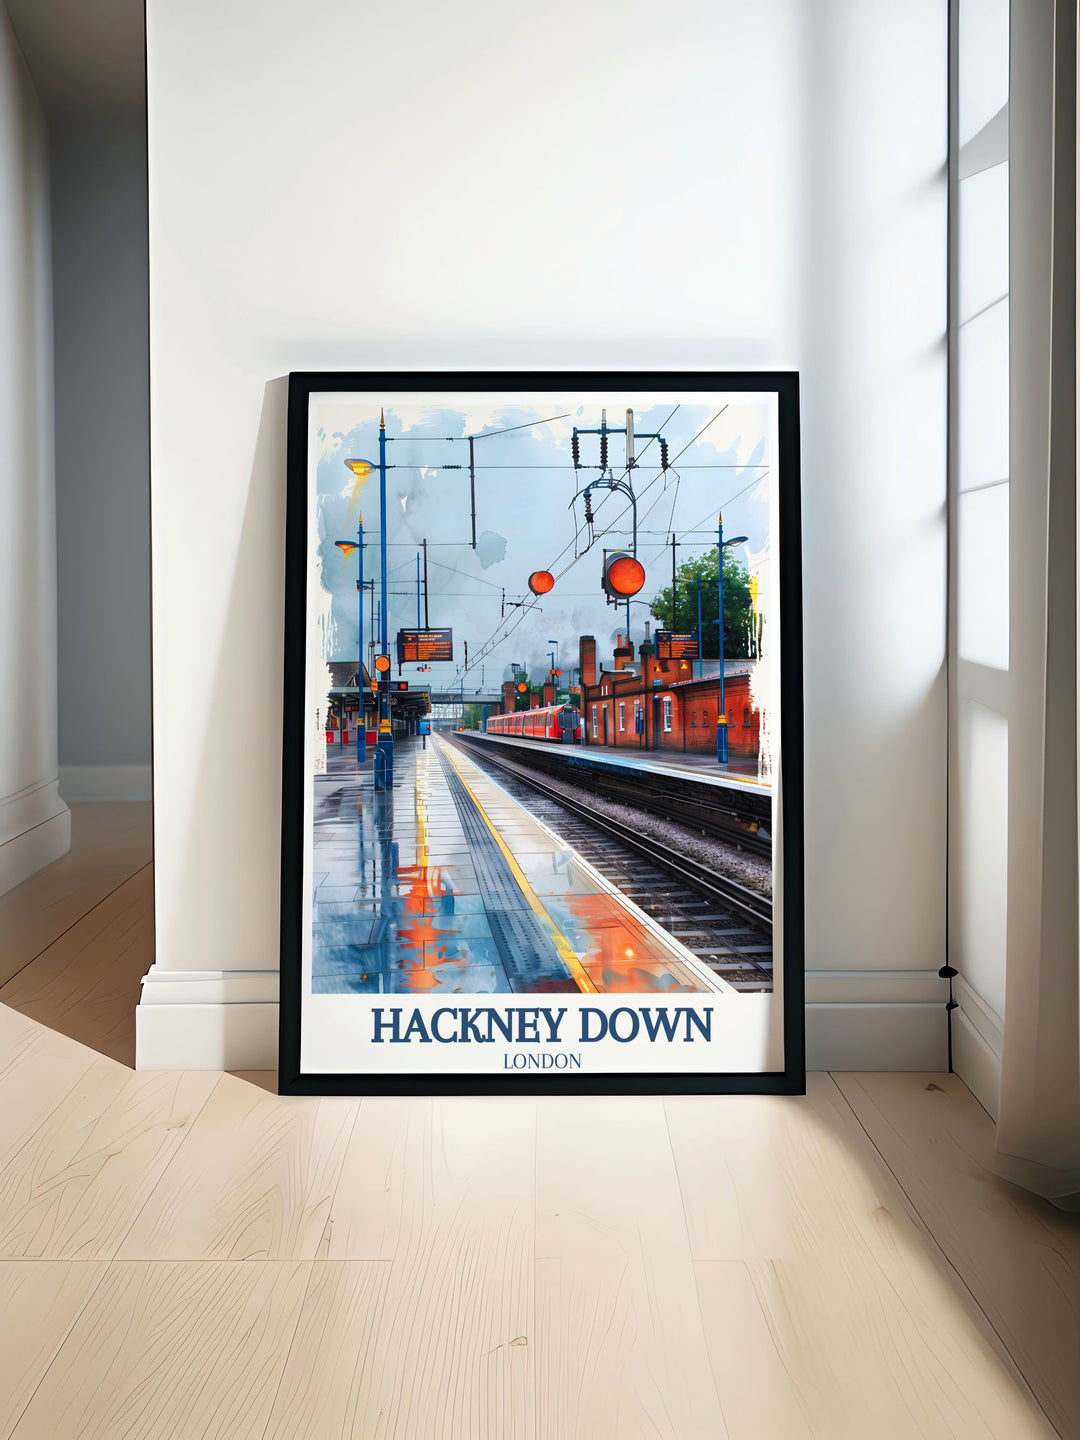 Featuring the serene landscapes of Hackney Downs, this travel poster captures the essence of its tranquil beauty and inviting atmosphere, perfect for creating a relaxing ambiance in any room.